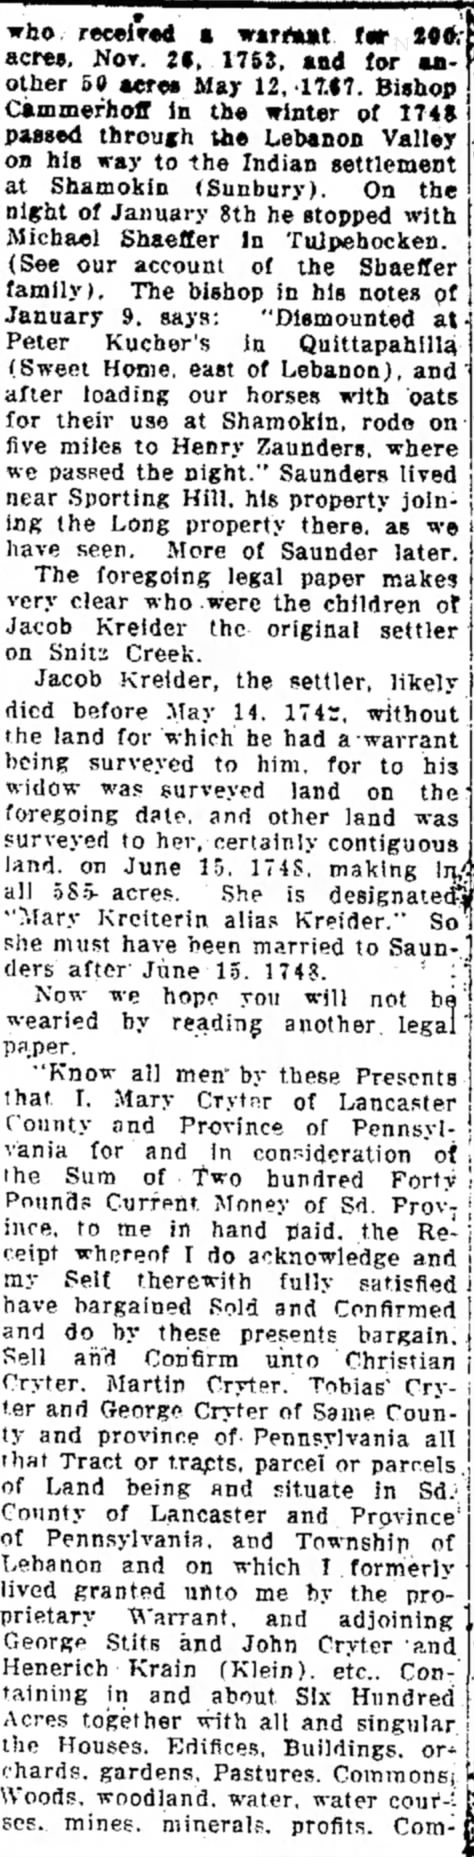 The History of the Kreider Family:  22 May 1919; colume 6